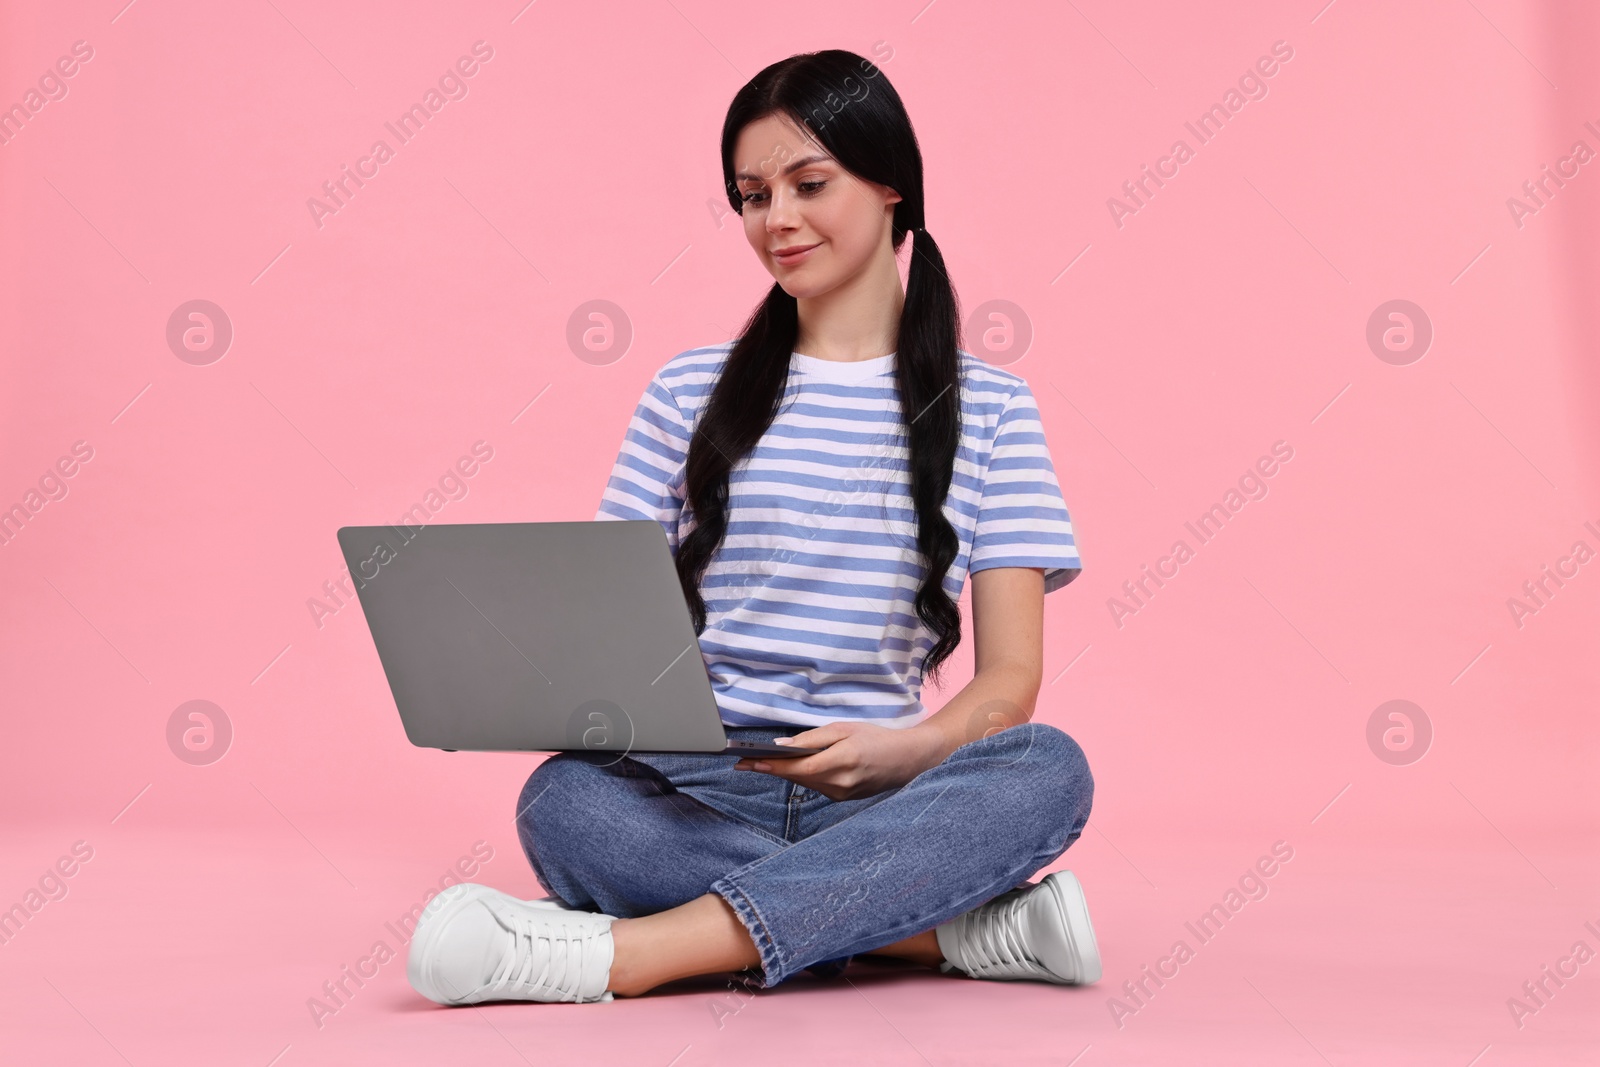 Photo of Student with laptop sitting on pink background